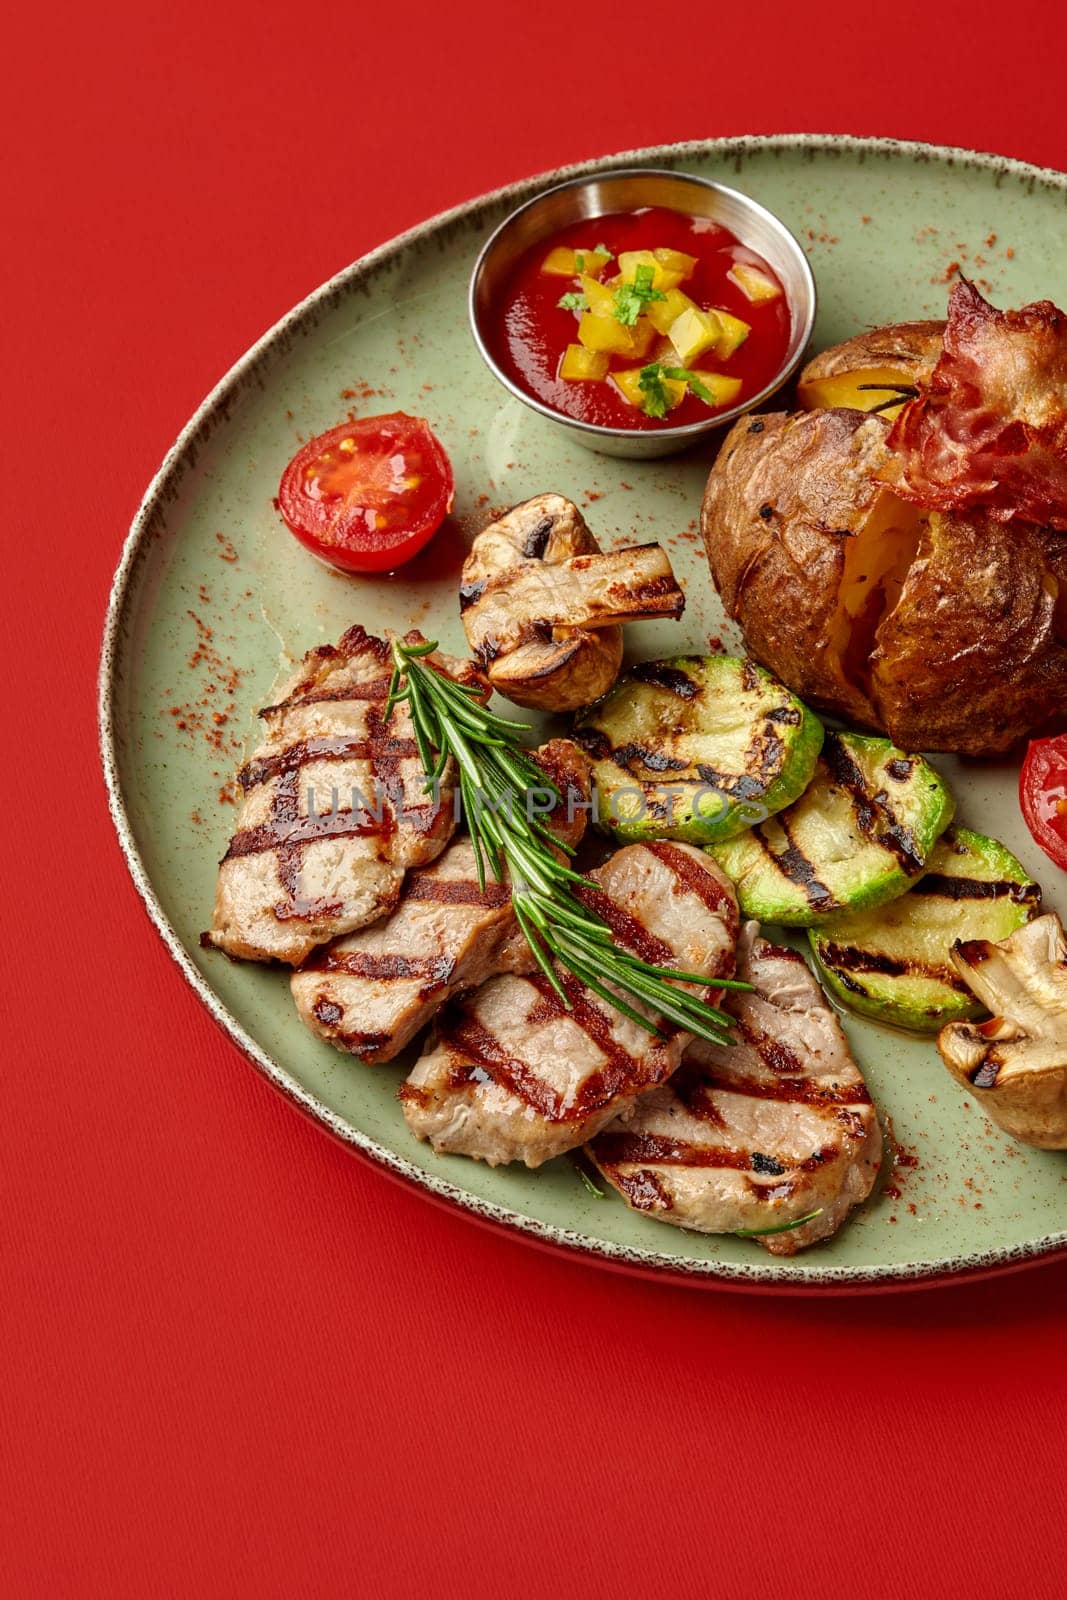 Tender grilled pork steaks with roasted zucchini and mushrooms, jacket potato topped with bacon, accompanied with tomato and yellow pepper salsa on striking red background